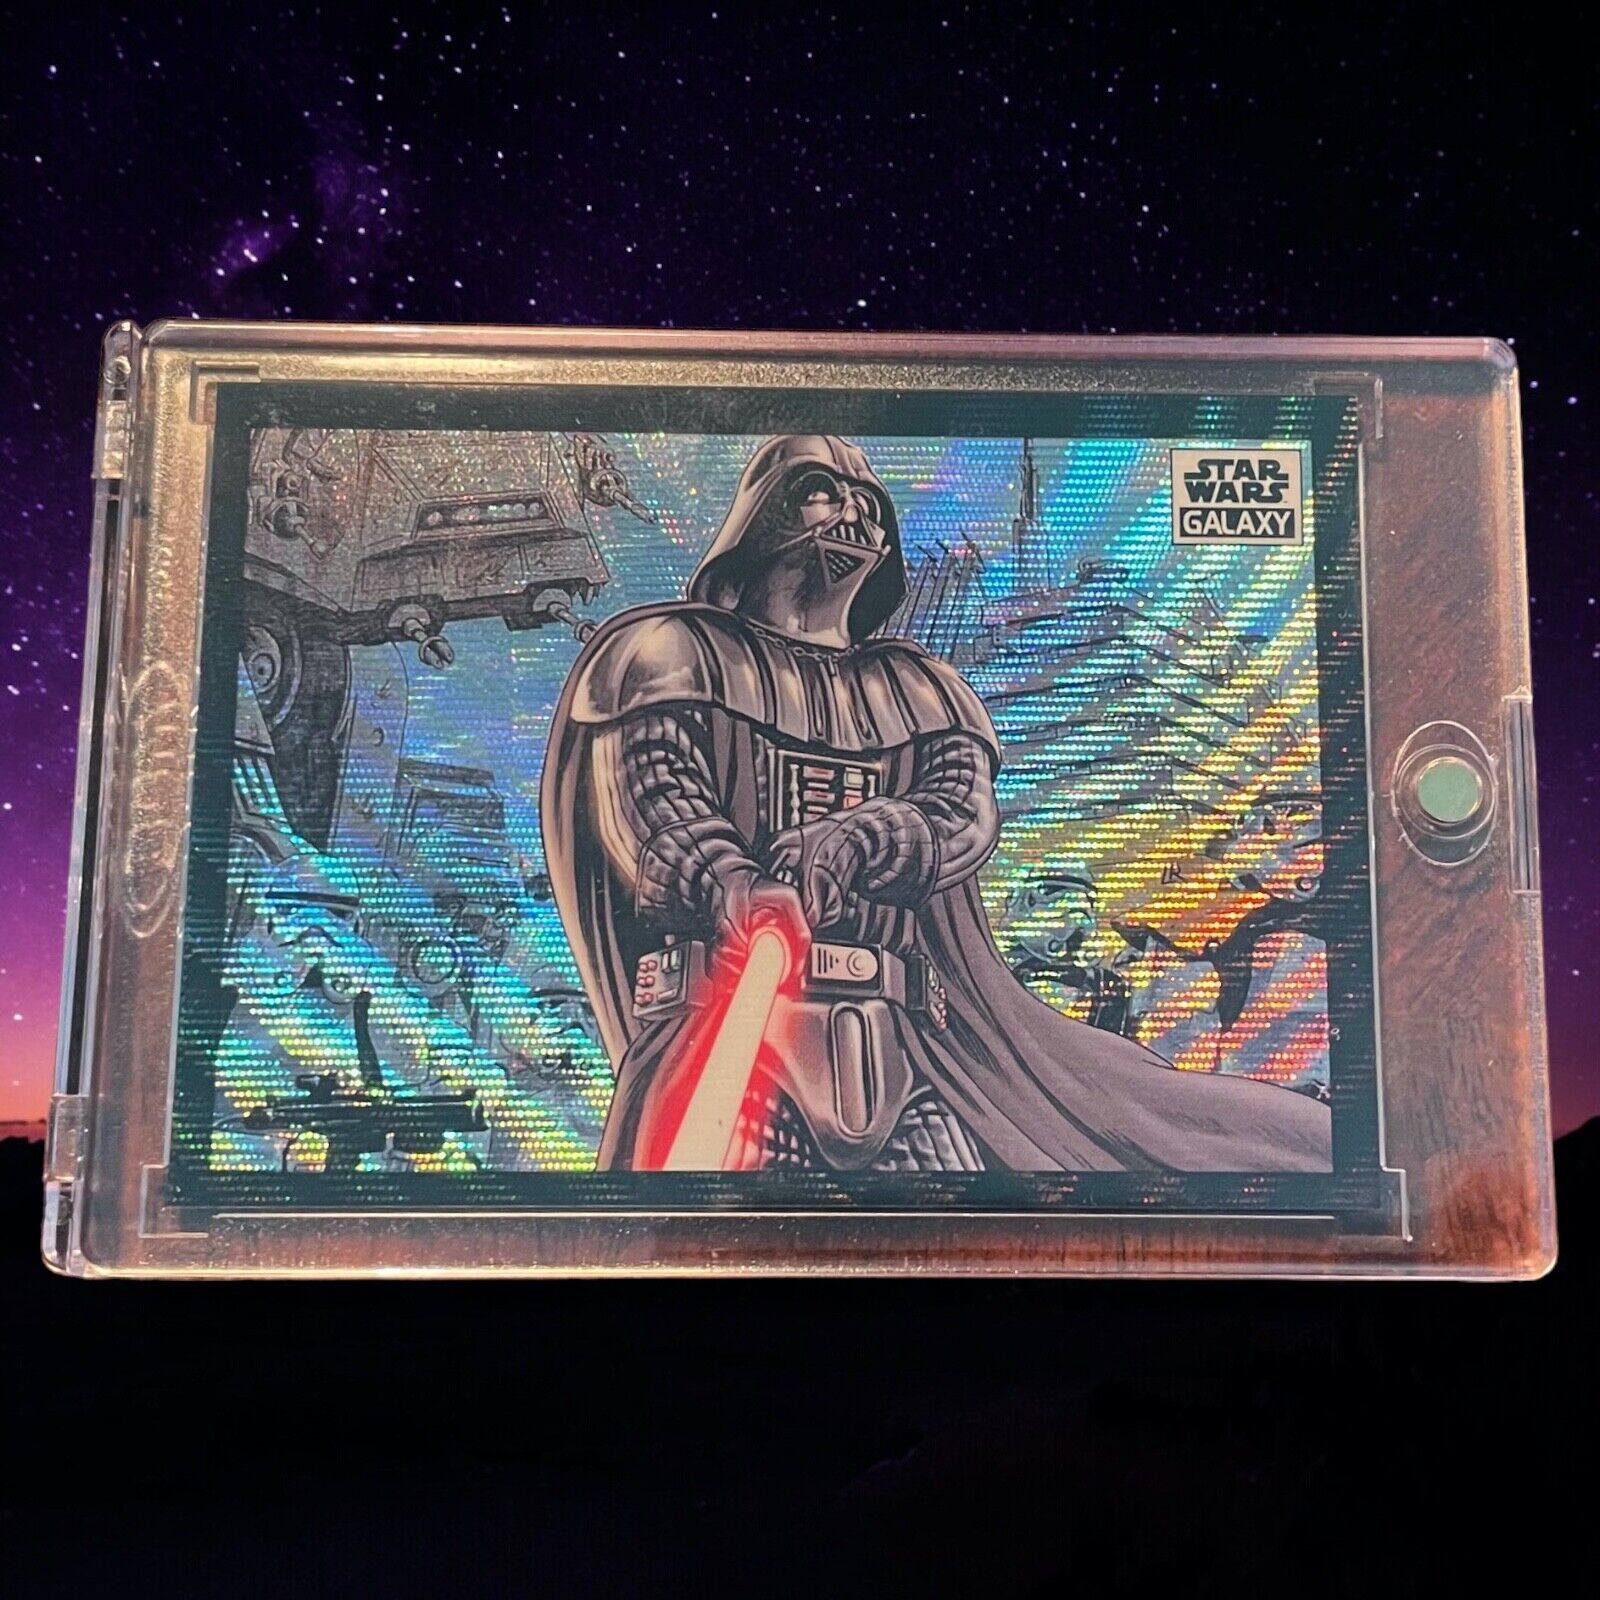 2022 Topps Star Wars Chrome Galaxy Lord Vader & His Stormtroopers #59 WAVE 53/99